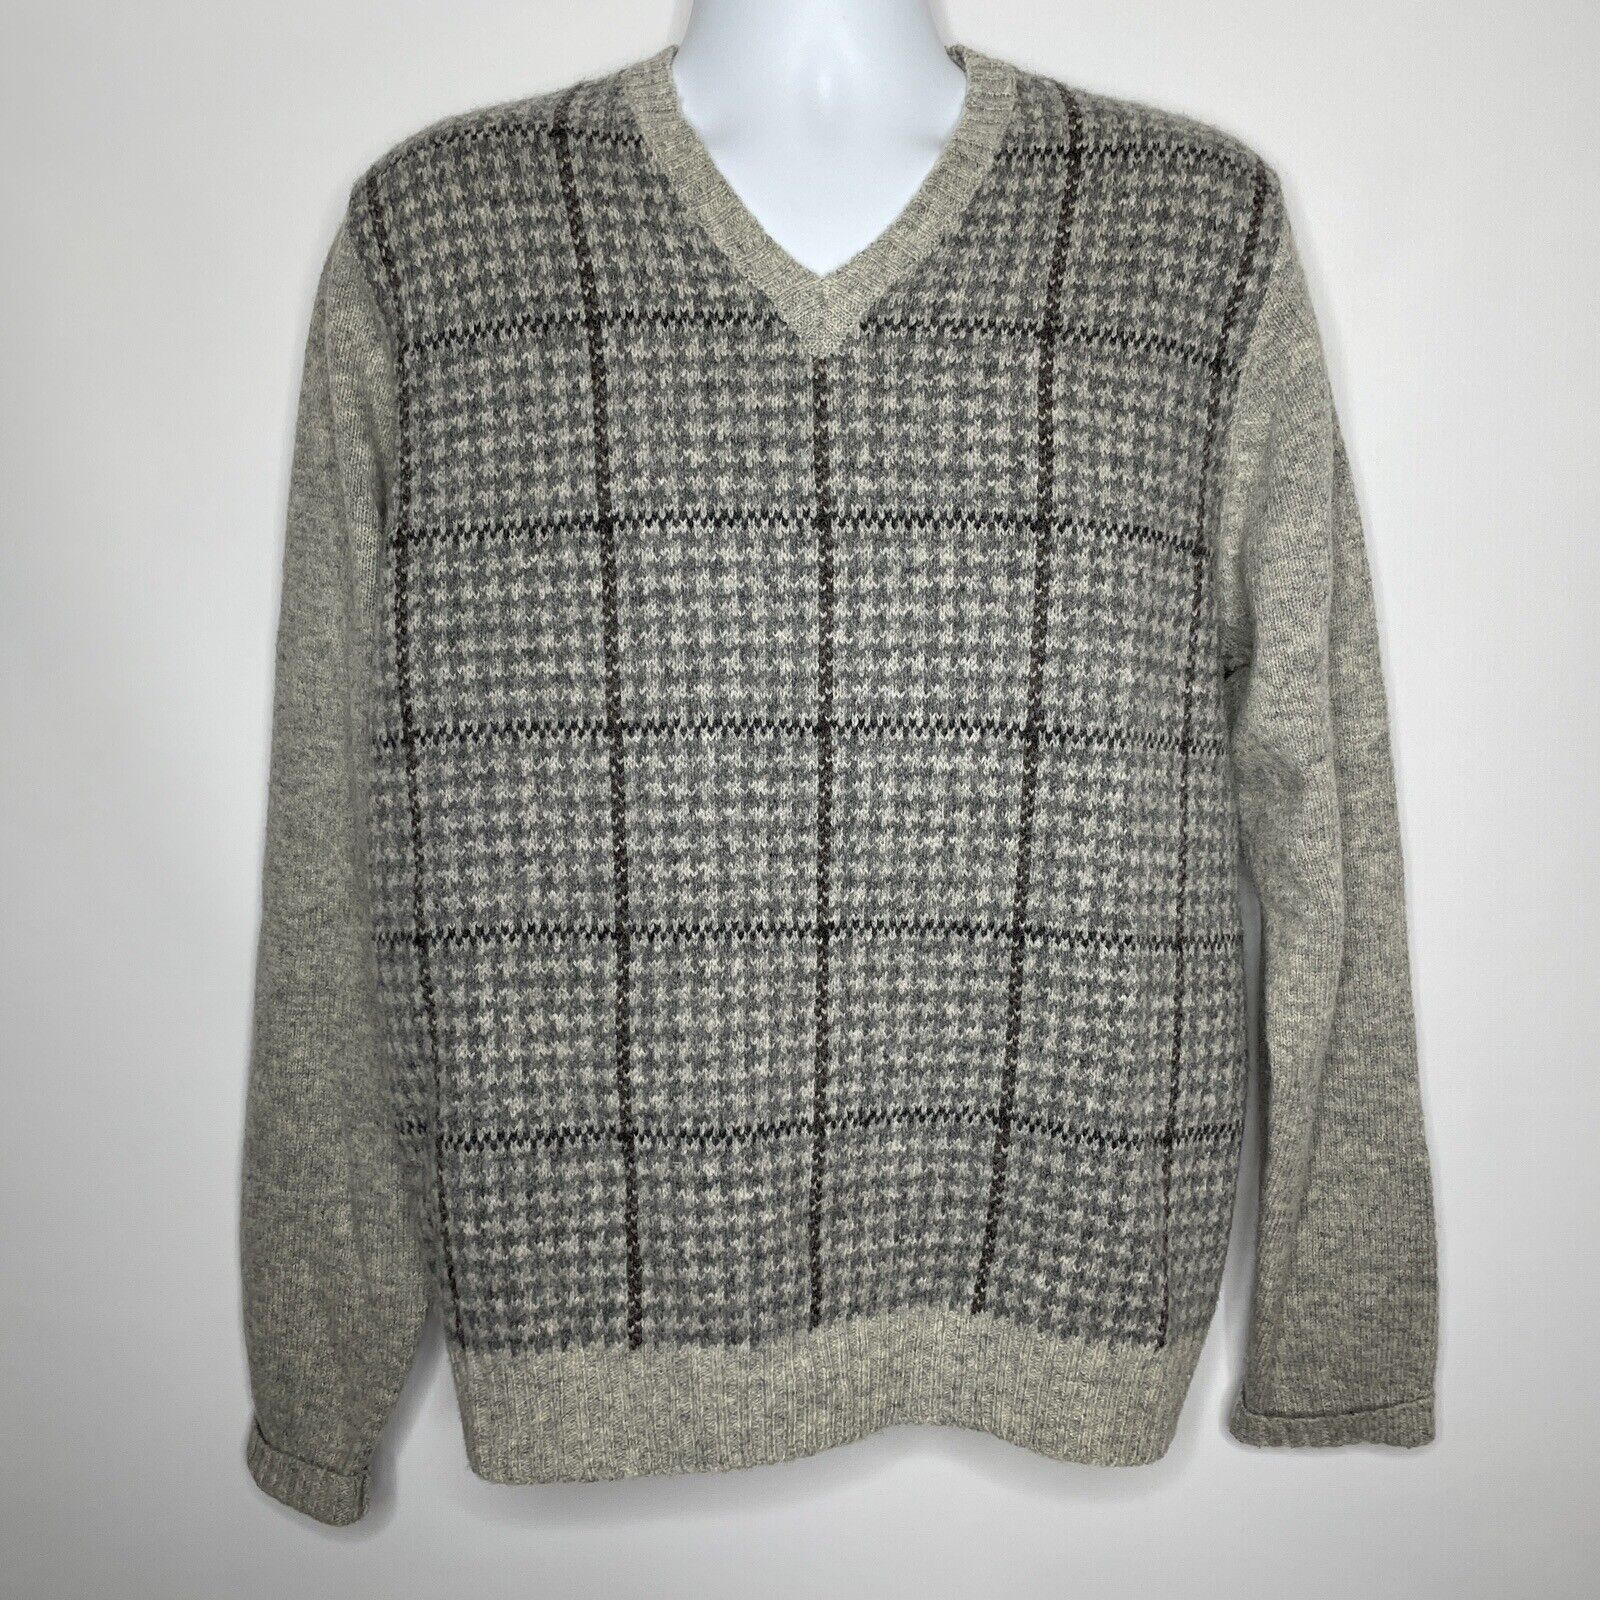 Vintage 80s Gray Shetland Wool Houndstooth Plaid Pullover Sweater Size US L / EU 52-54 / 3 - 1 Preview